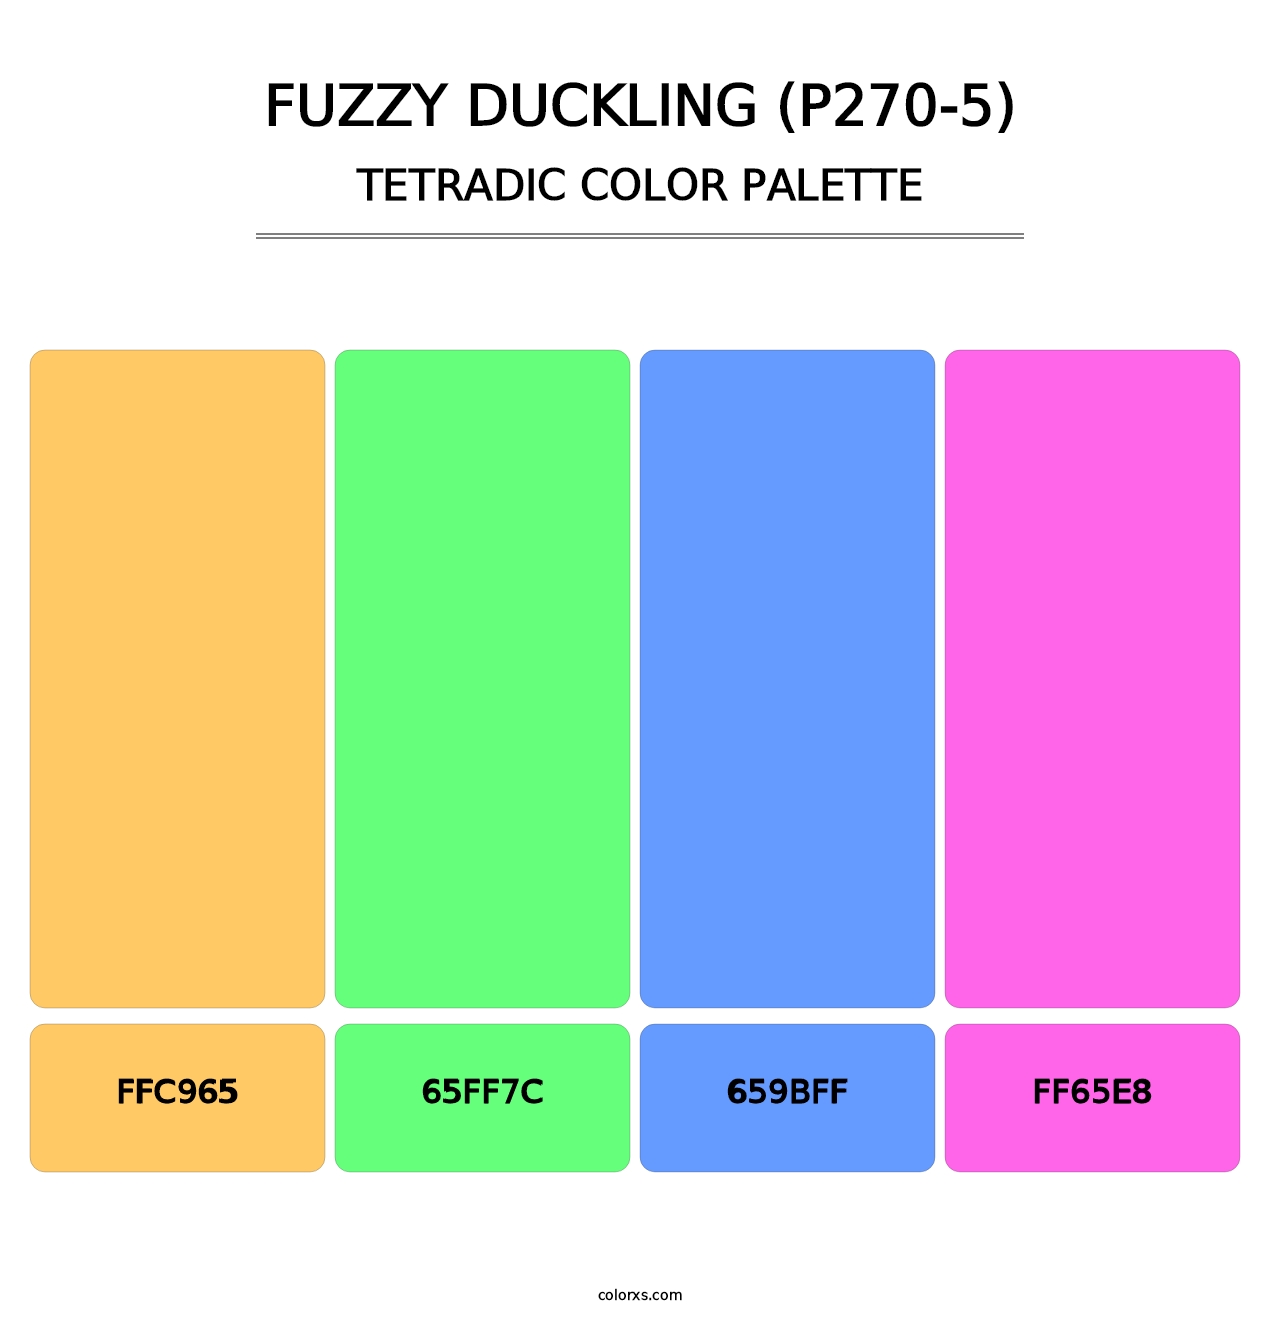 Fuzzy Duckling (P270-5) - Tetradic Color Palette